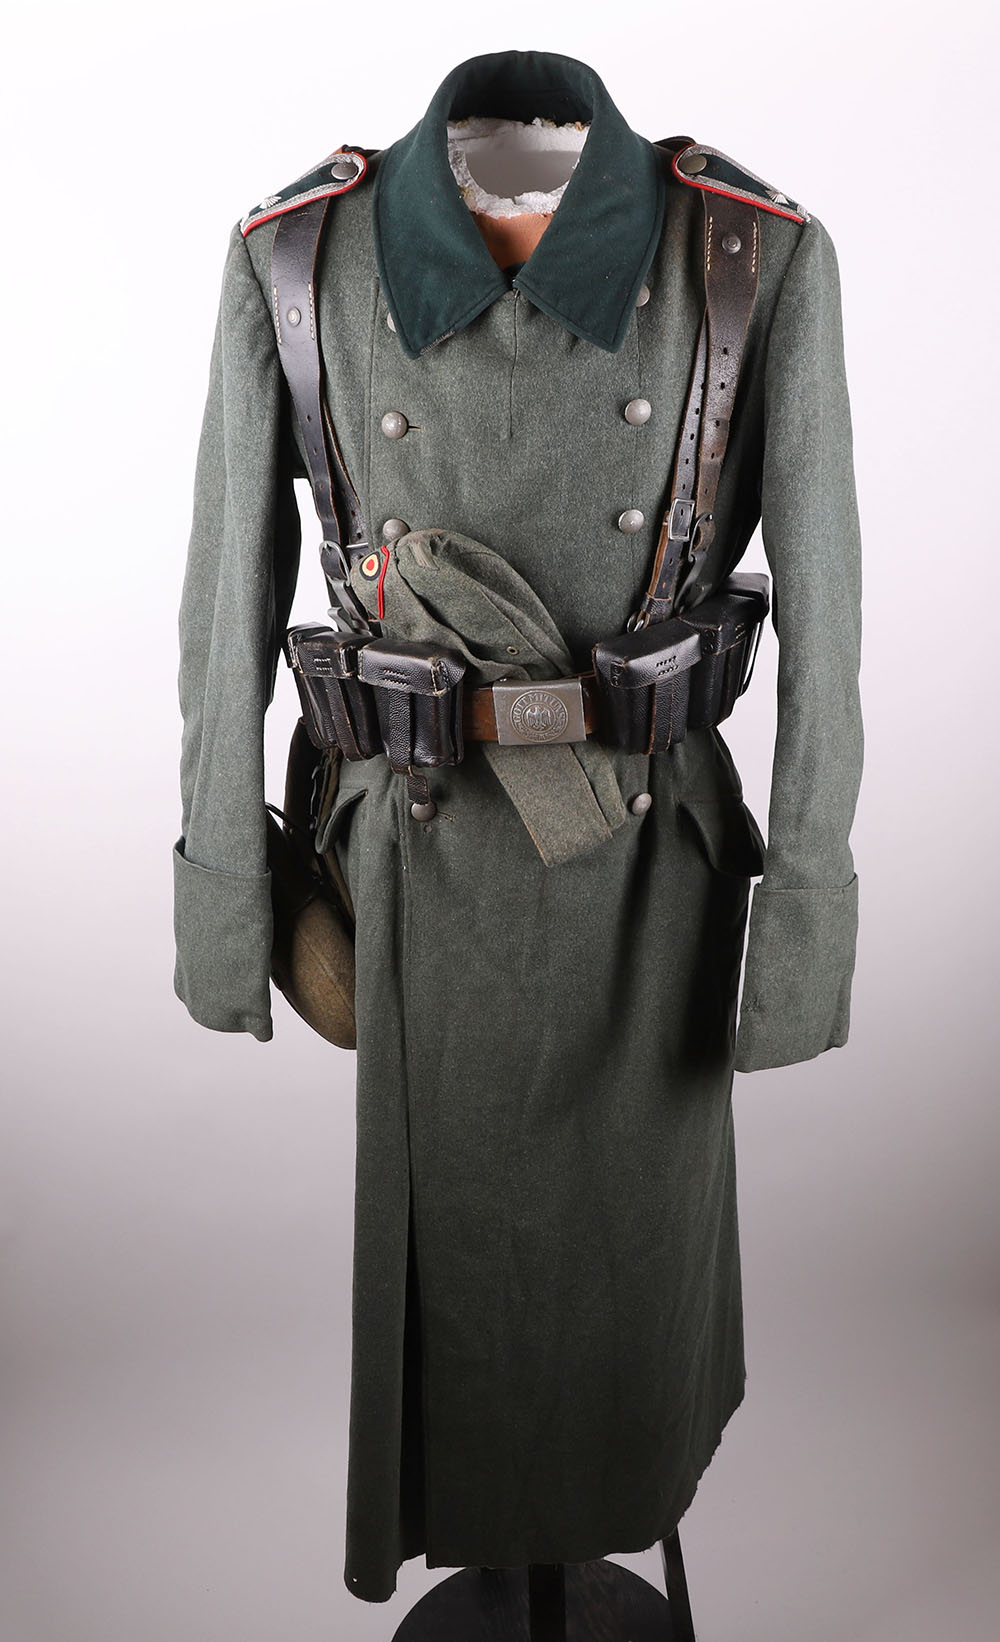 WW2 German Army Greatcoat, Overseas Cap and Equipment Set - Image 21 of 23